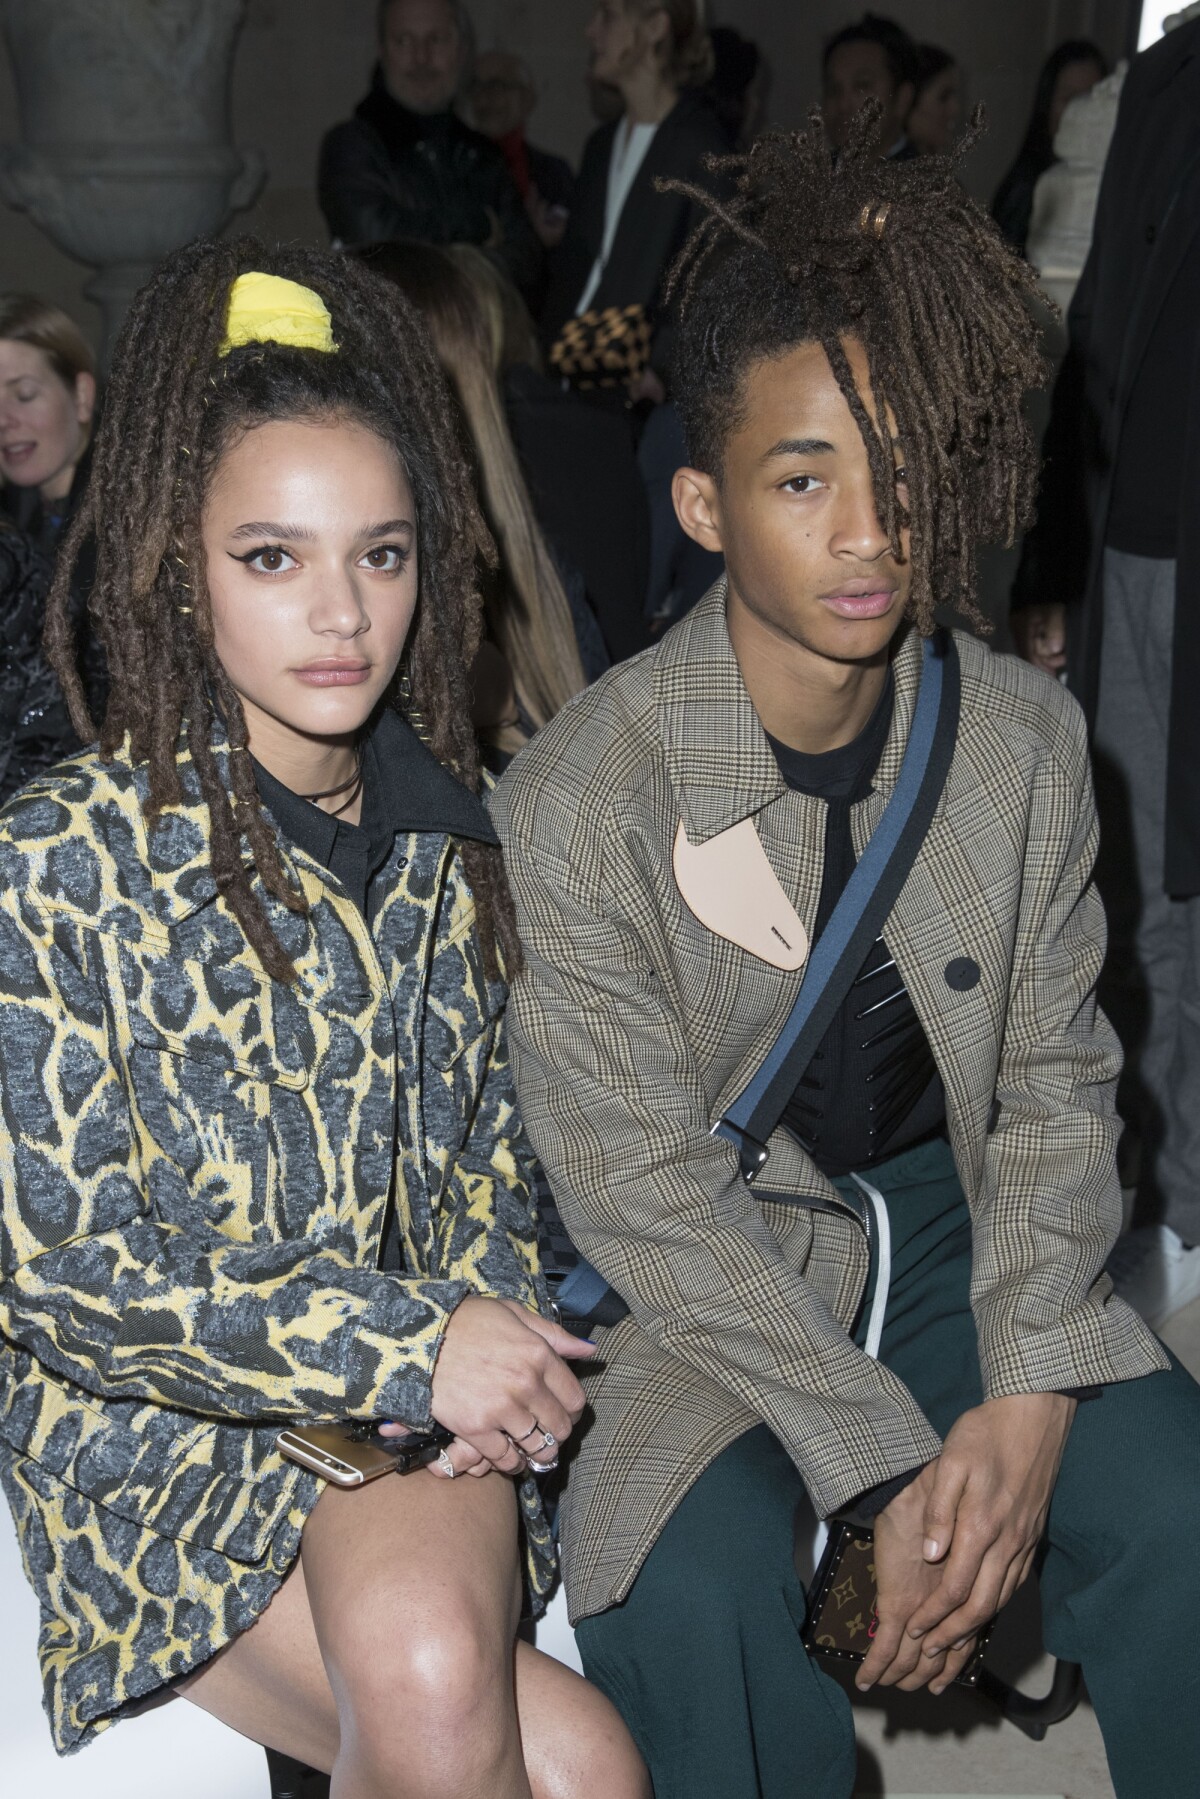 Jaden Smith and Sasha Lane's High Ponytails Front Row at Louis Vuitton's  Fall 2017 Show